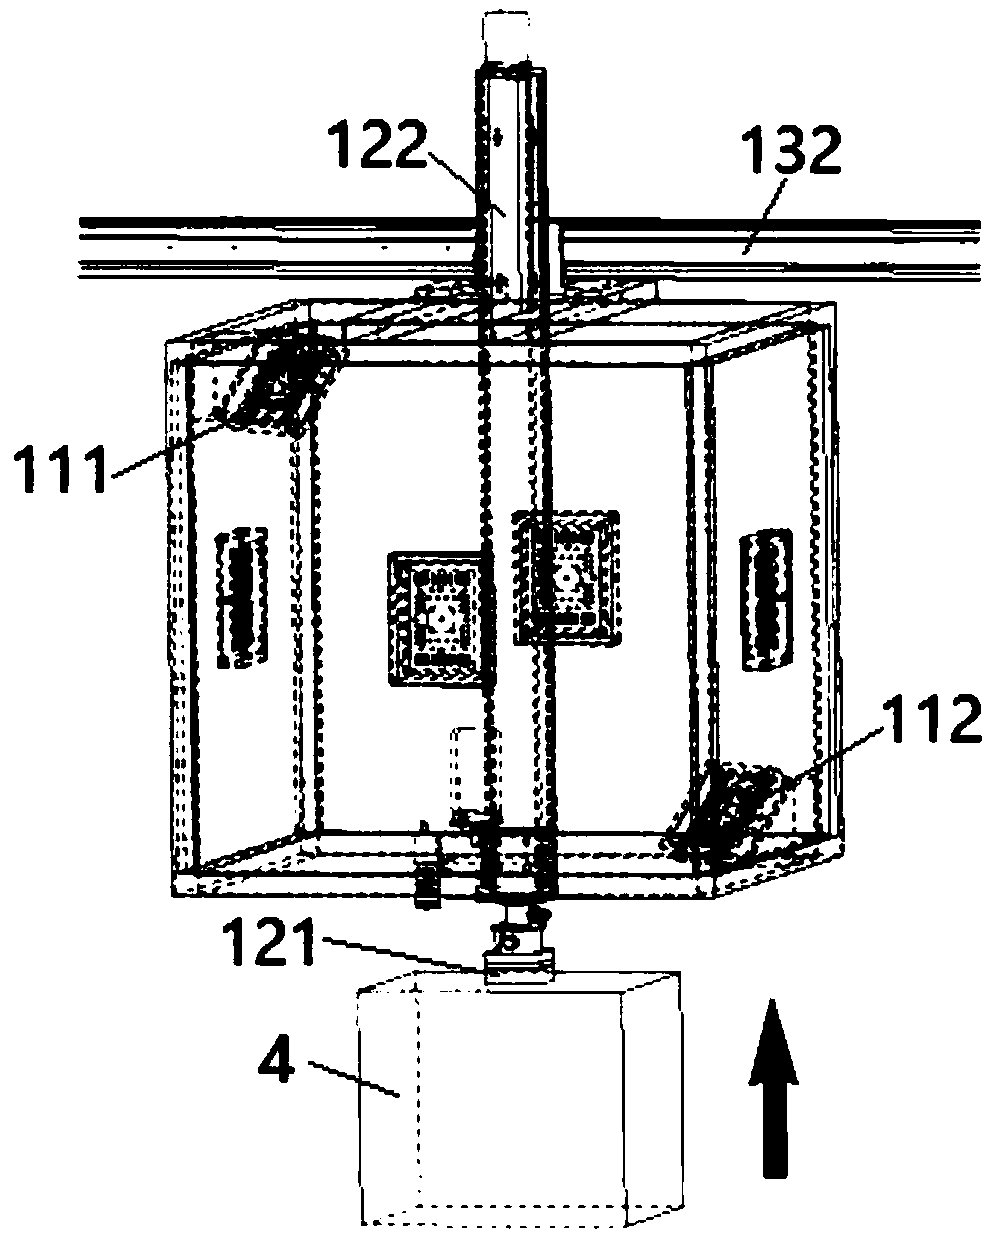 Loading manipulator capable of acquiring information and loading system